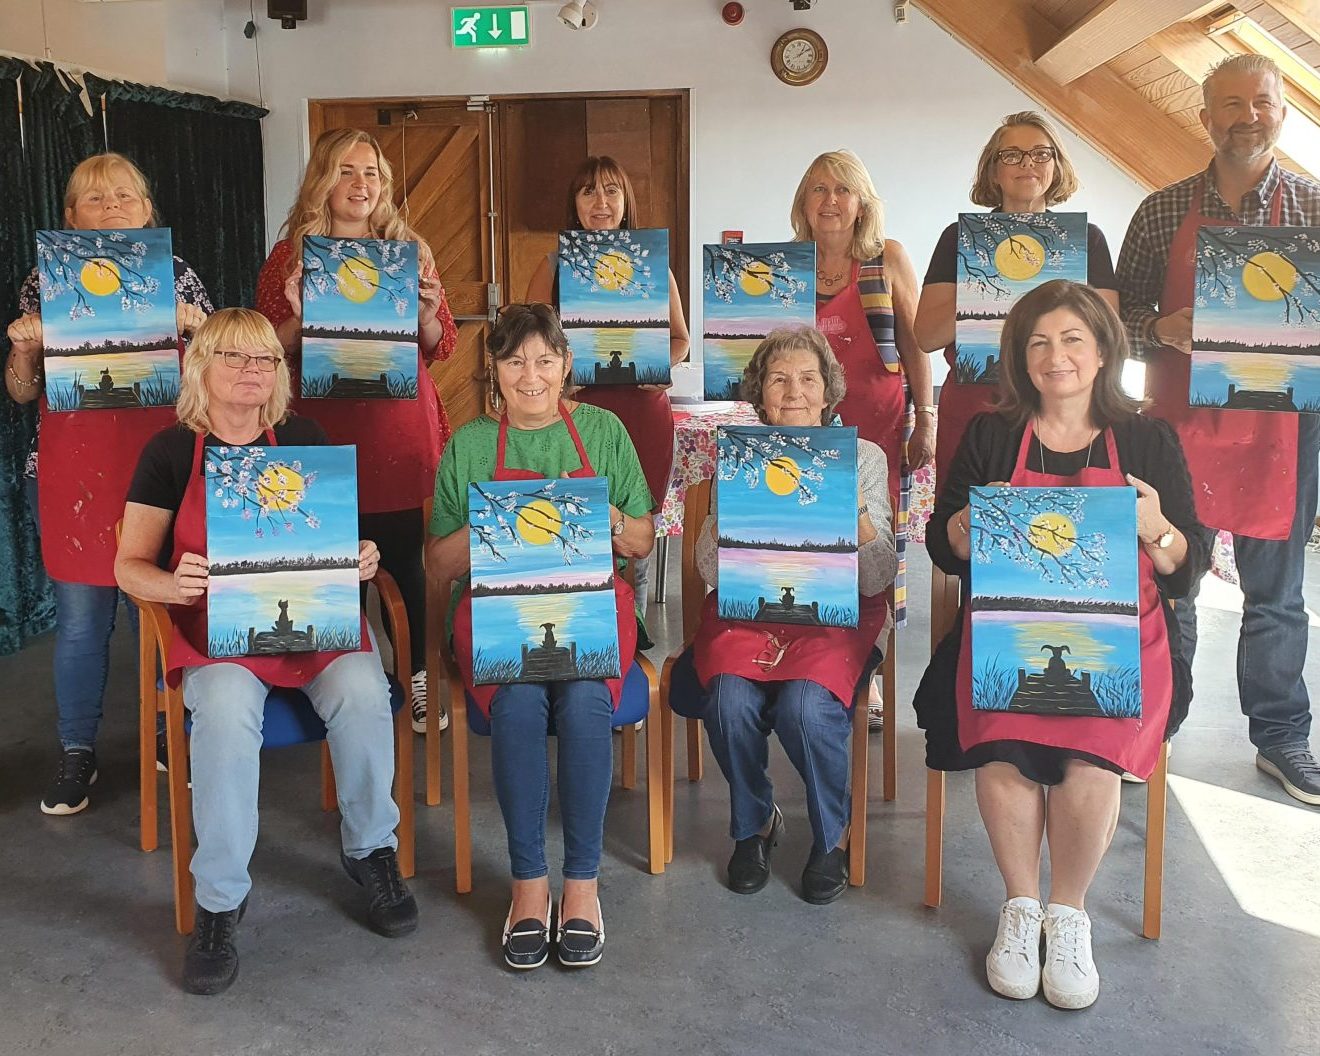 An image of several individuals holding up handpainted canvases.